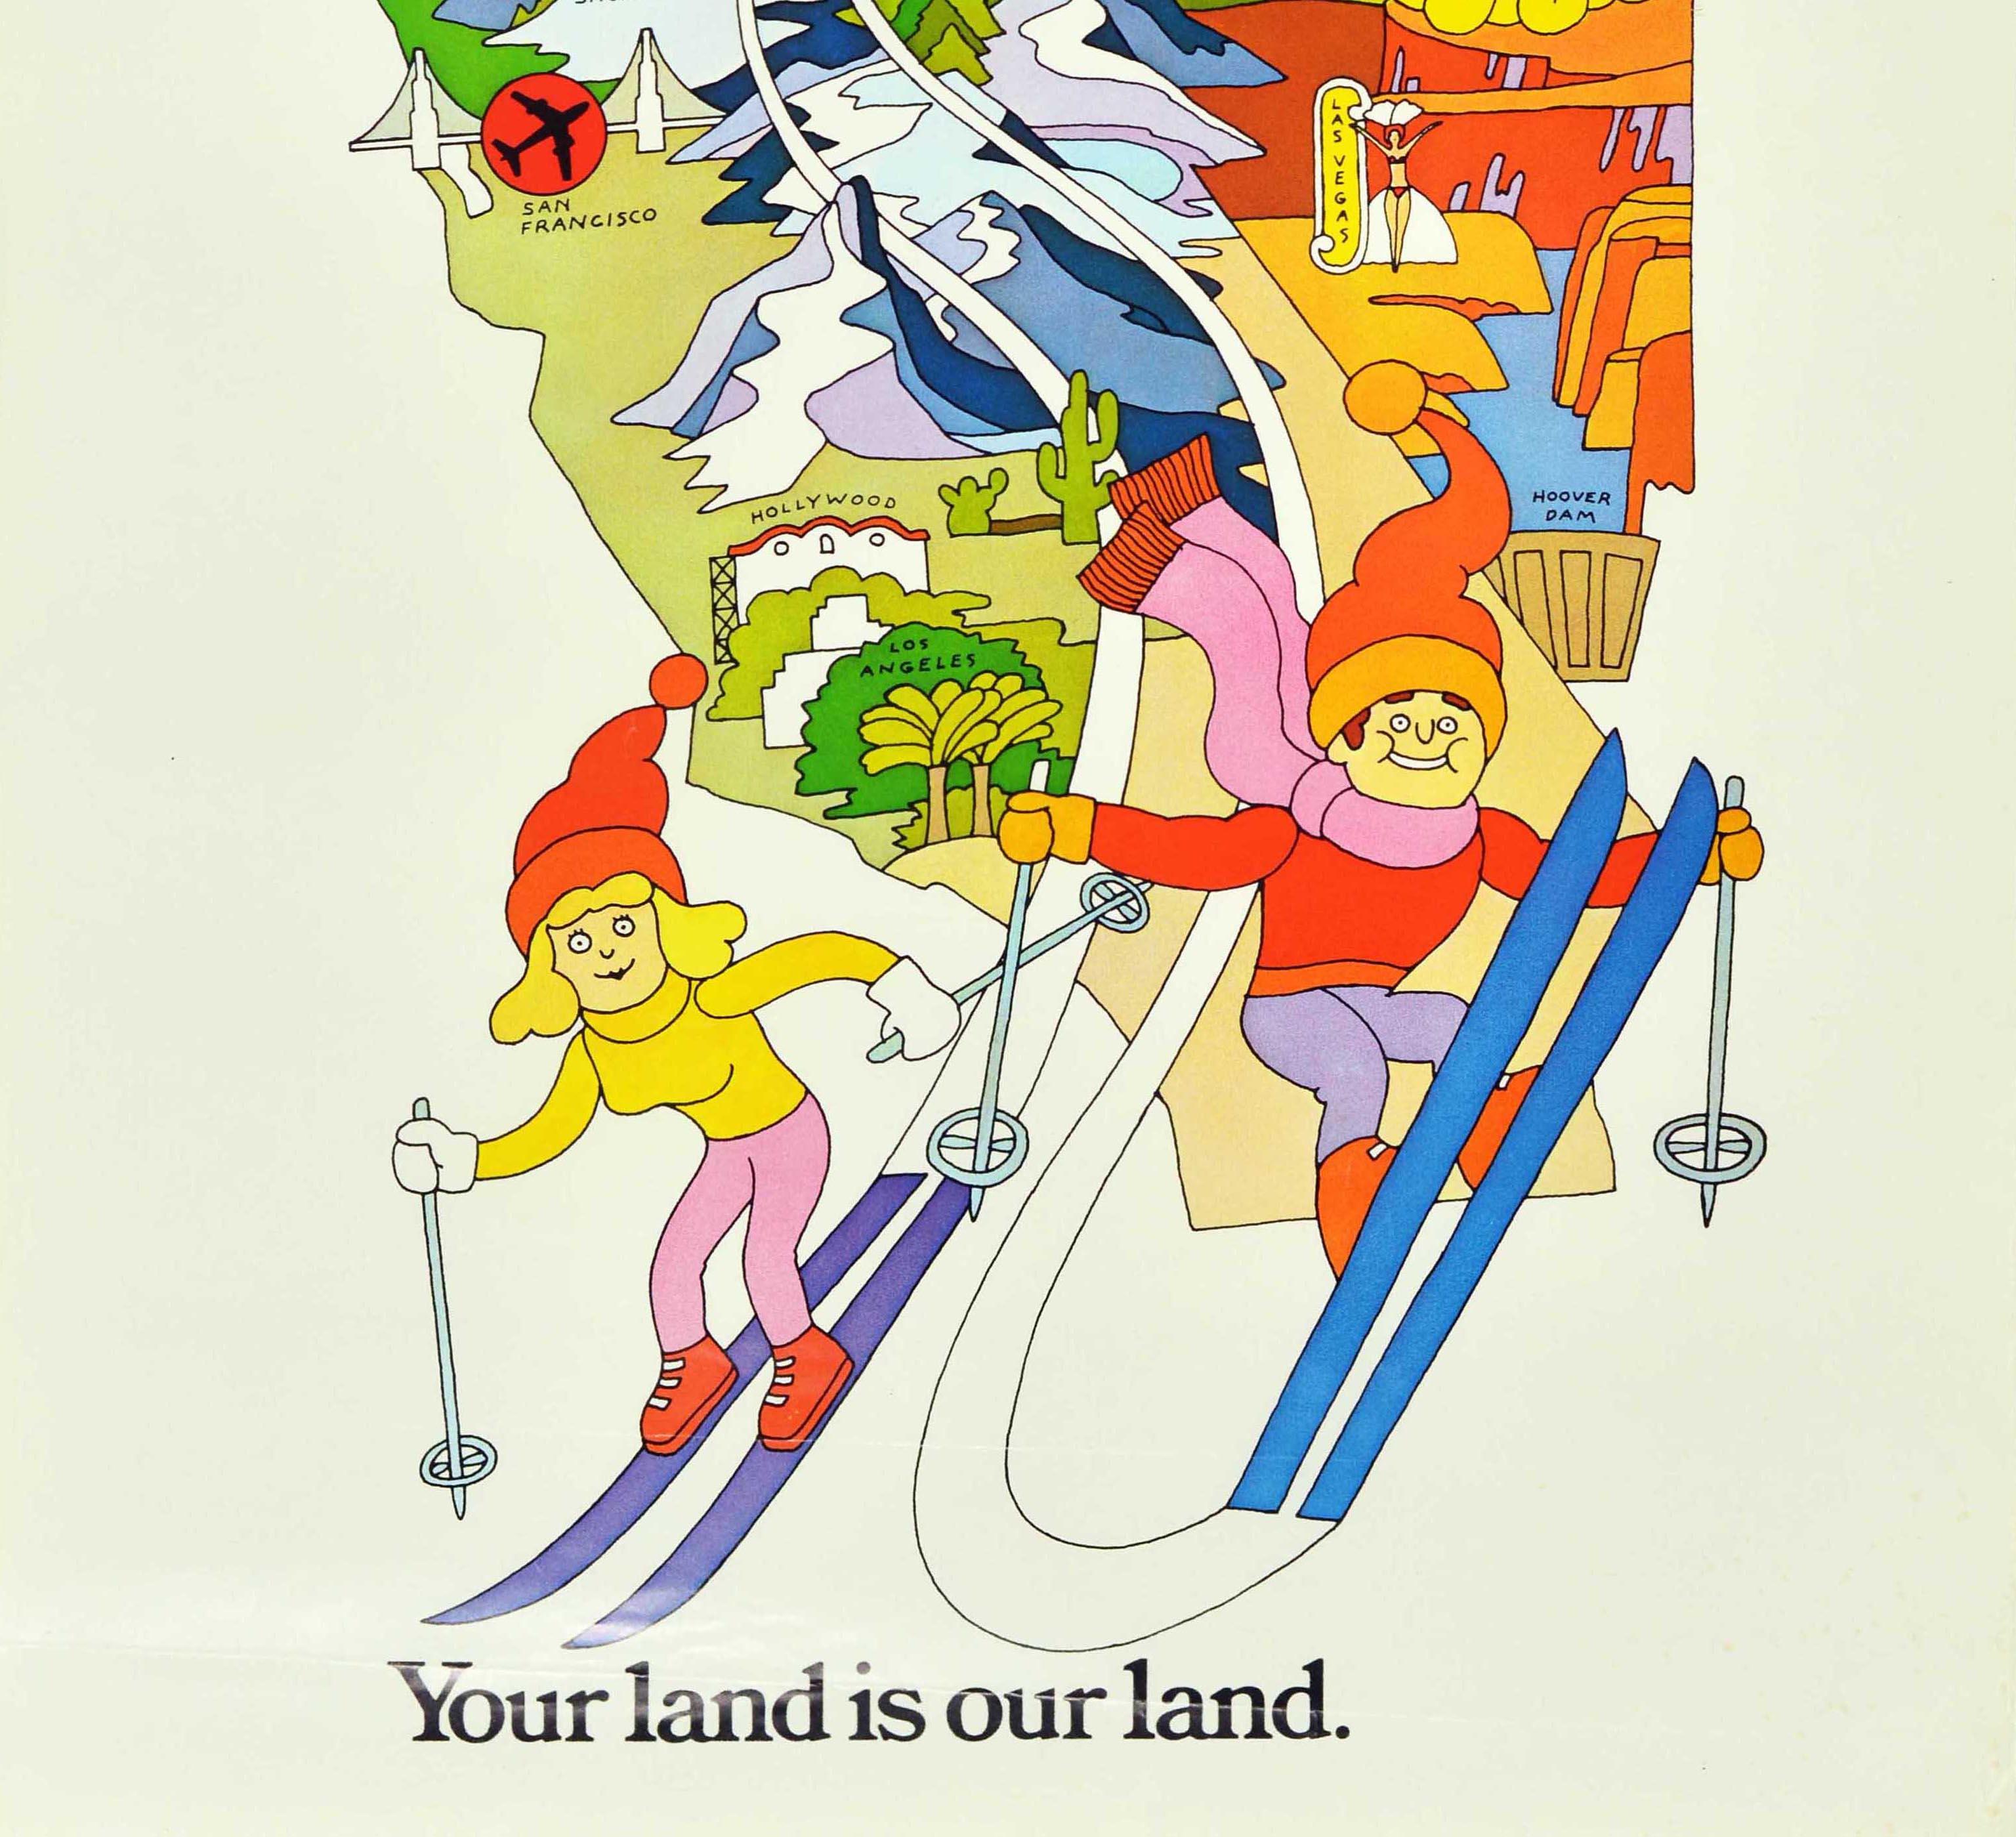 Original vintage travel poster - Ski the West United Air Lines California Nevada Your Land is our land. Colourful psychedelic style design depicting two skiers skiing towards the viewer with their ski lines in front of a map showing snow topped